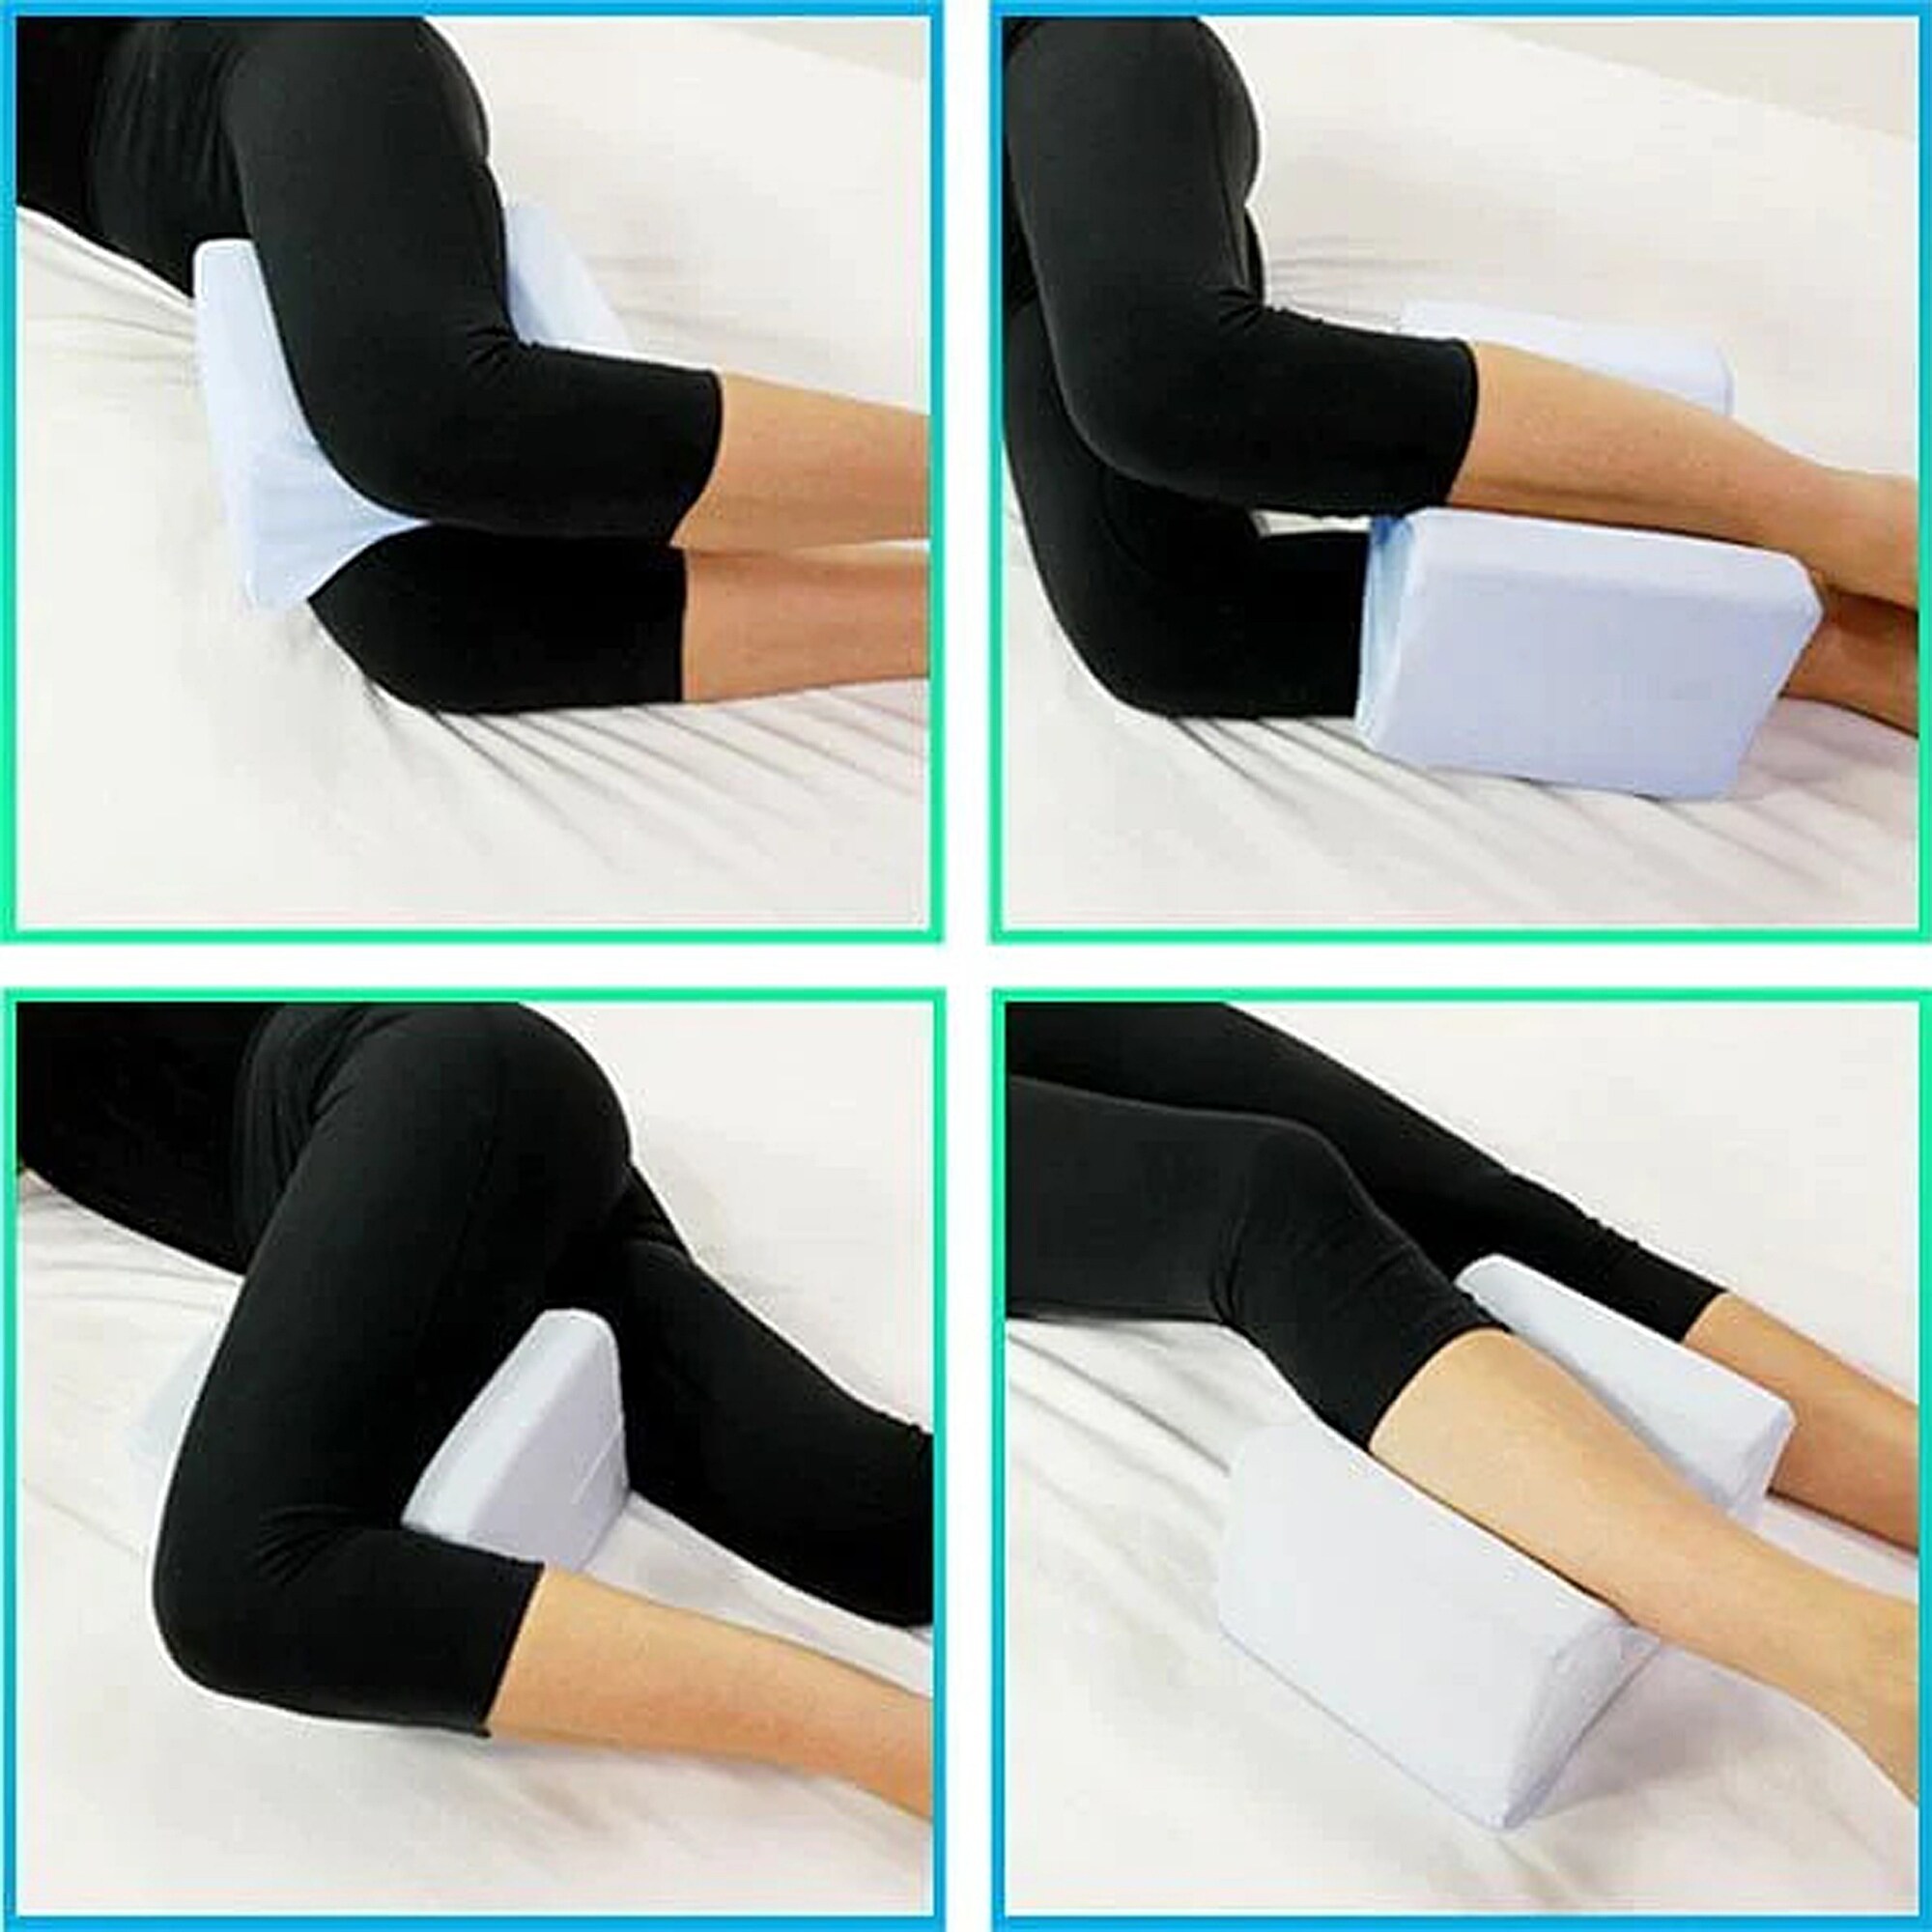 https://ak1.ostkcdn.com/images/products/is/images/direct/53b75641bd62f6fb36a221ba4f4666dacb37468d/Leg-Pillow---Adjusts-Your-Hips%2C-Legs-And-Spine-For-A-Comfortable-Sleep.jpg